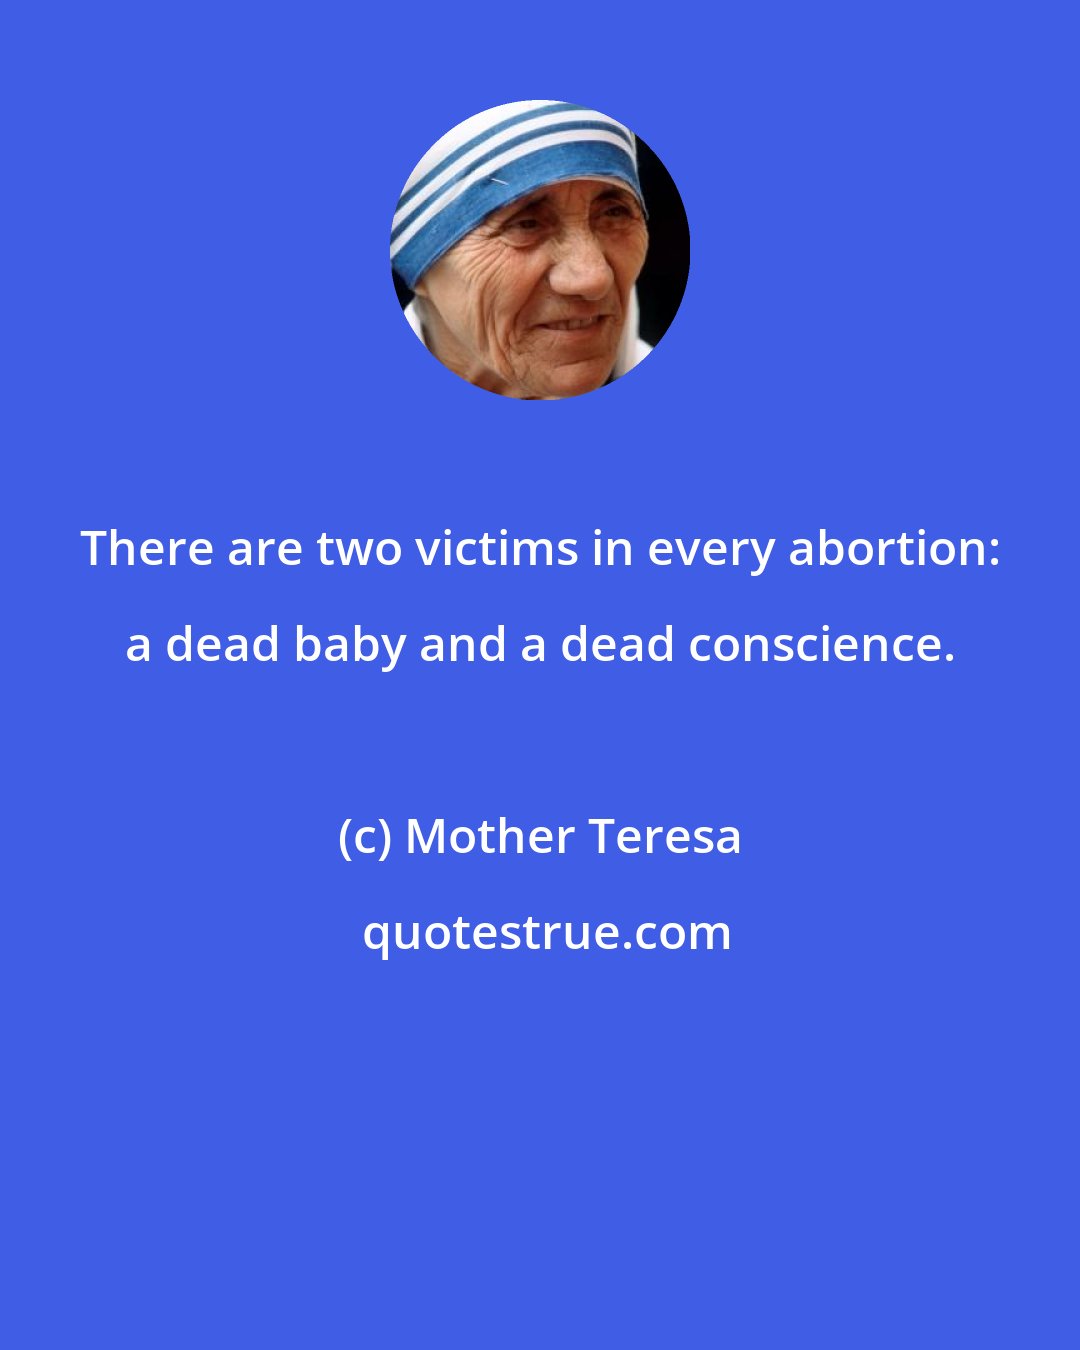 Mother Teresa: There are two victims in every abortion: a dead baby and a dead conscience.